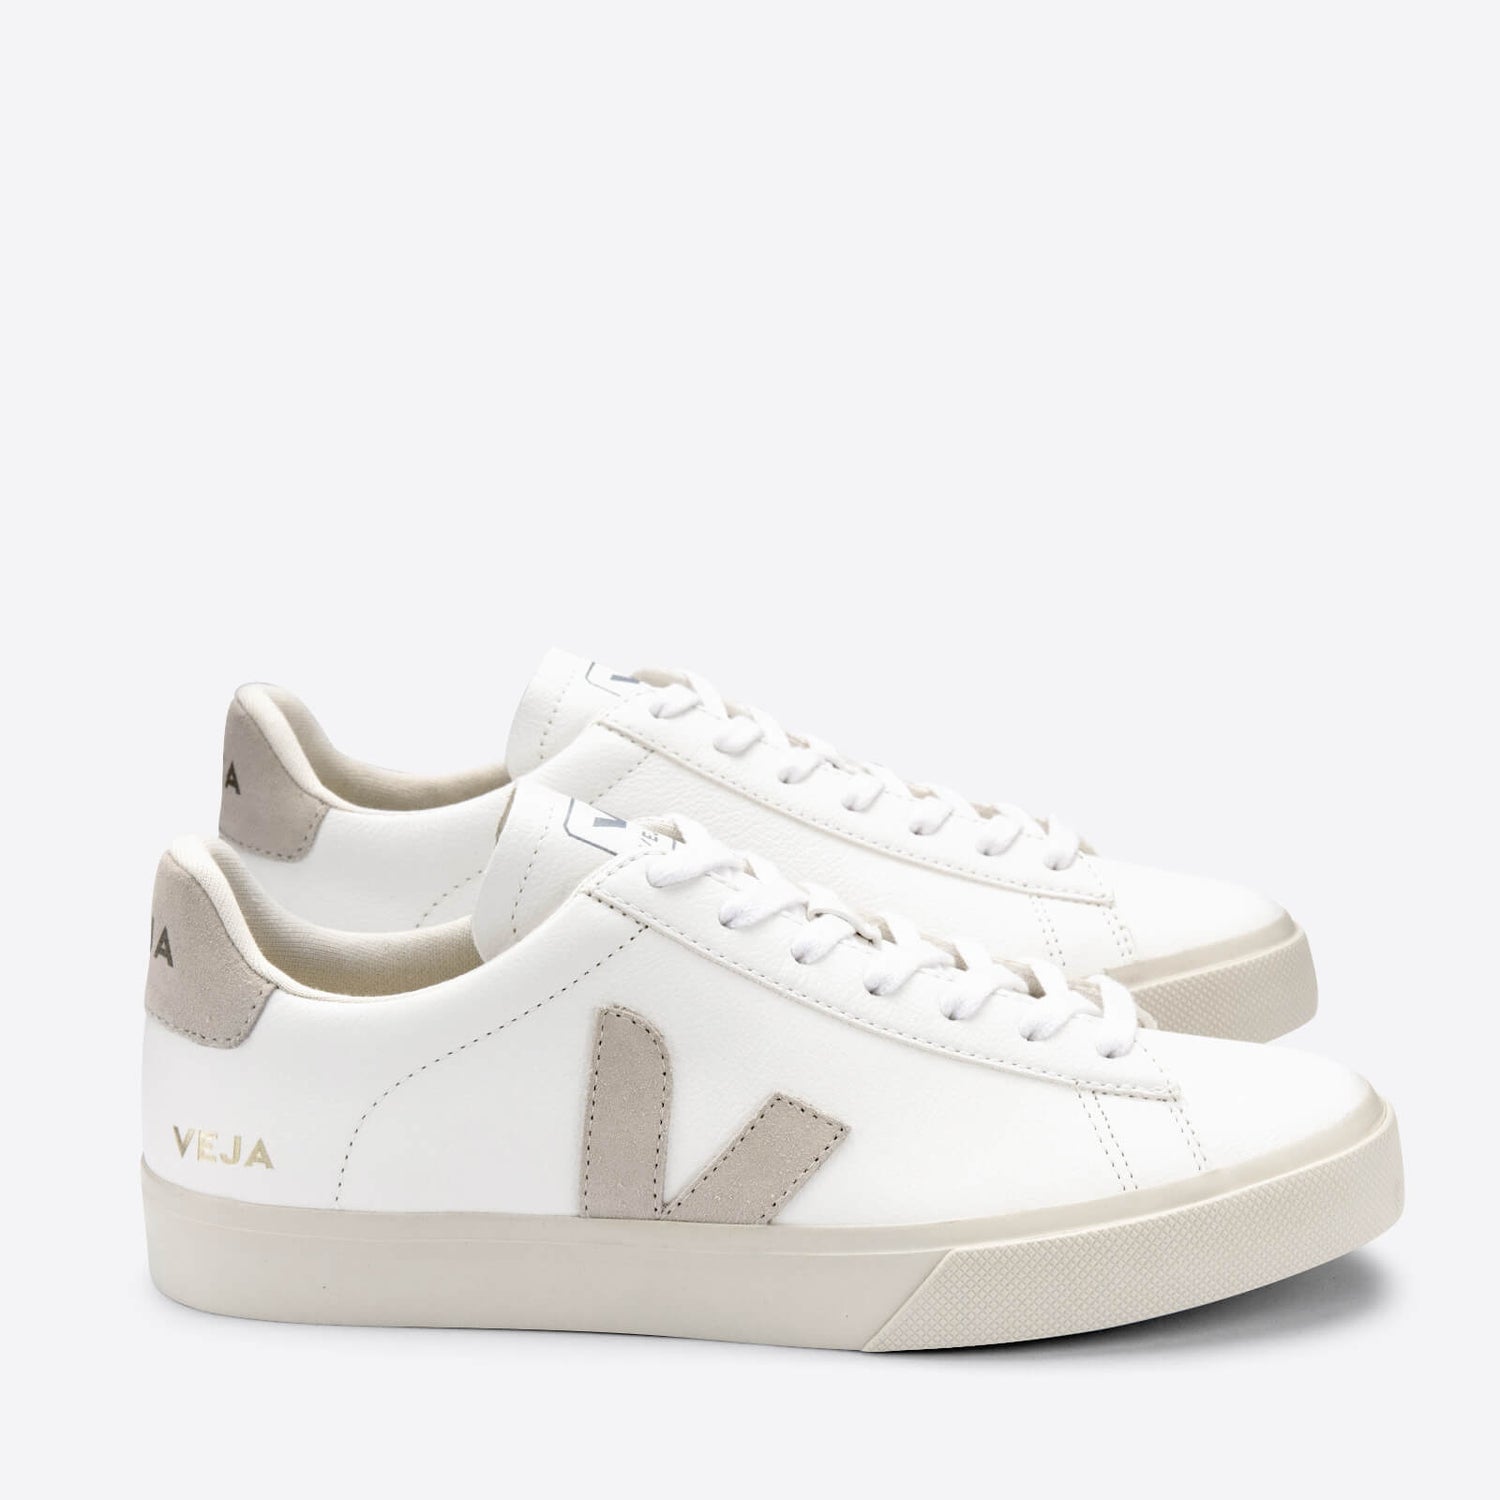 Veja Women's Campo Chrome Free Leather Trainers - Extra White/Natural - UK 3